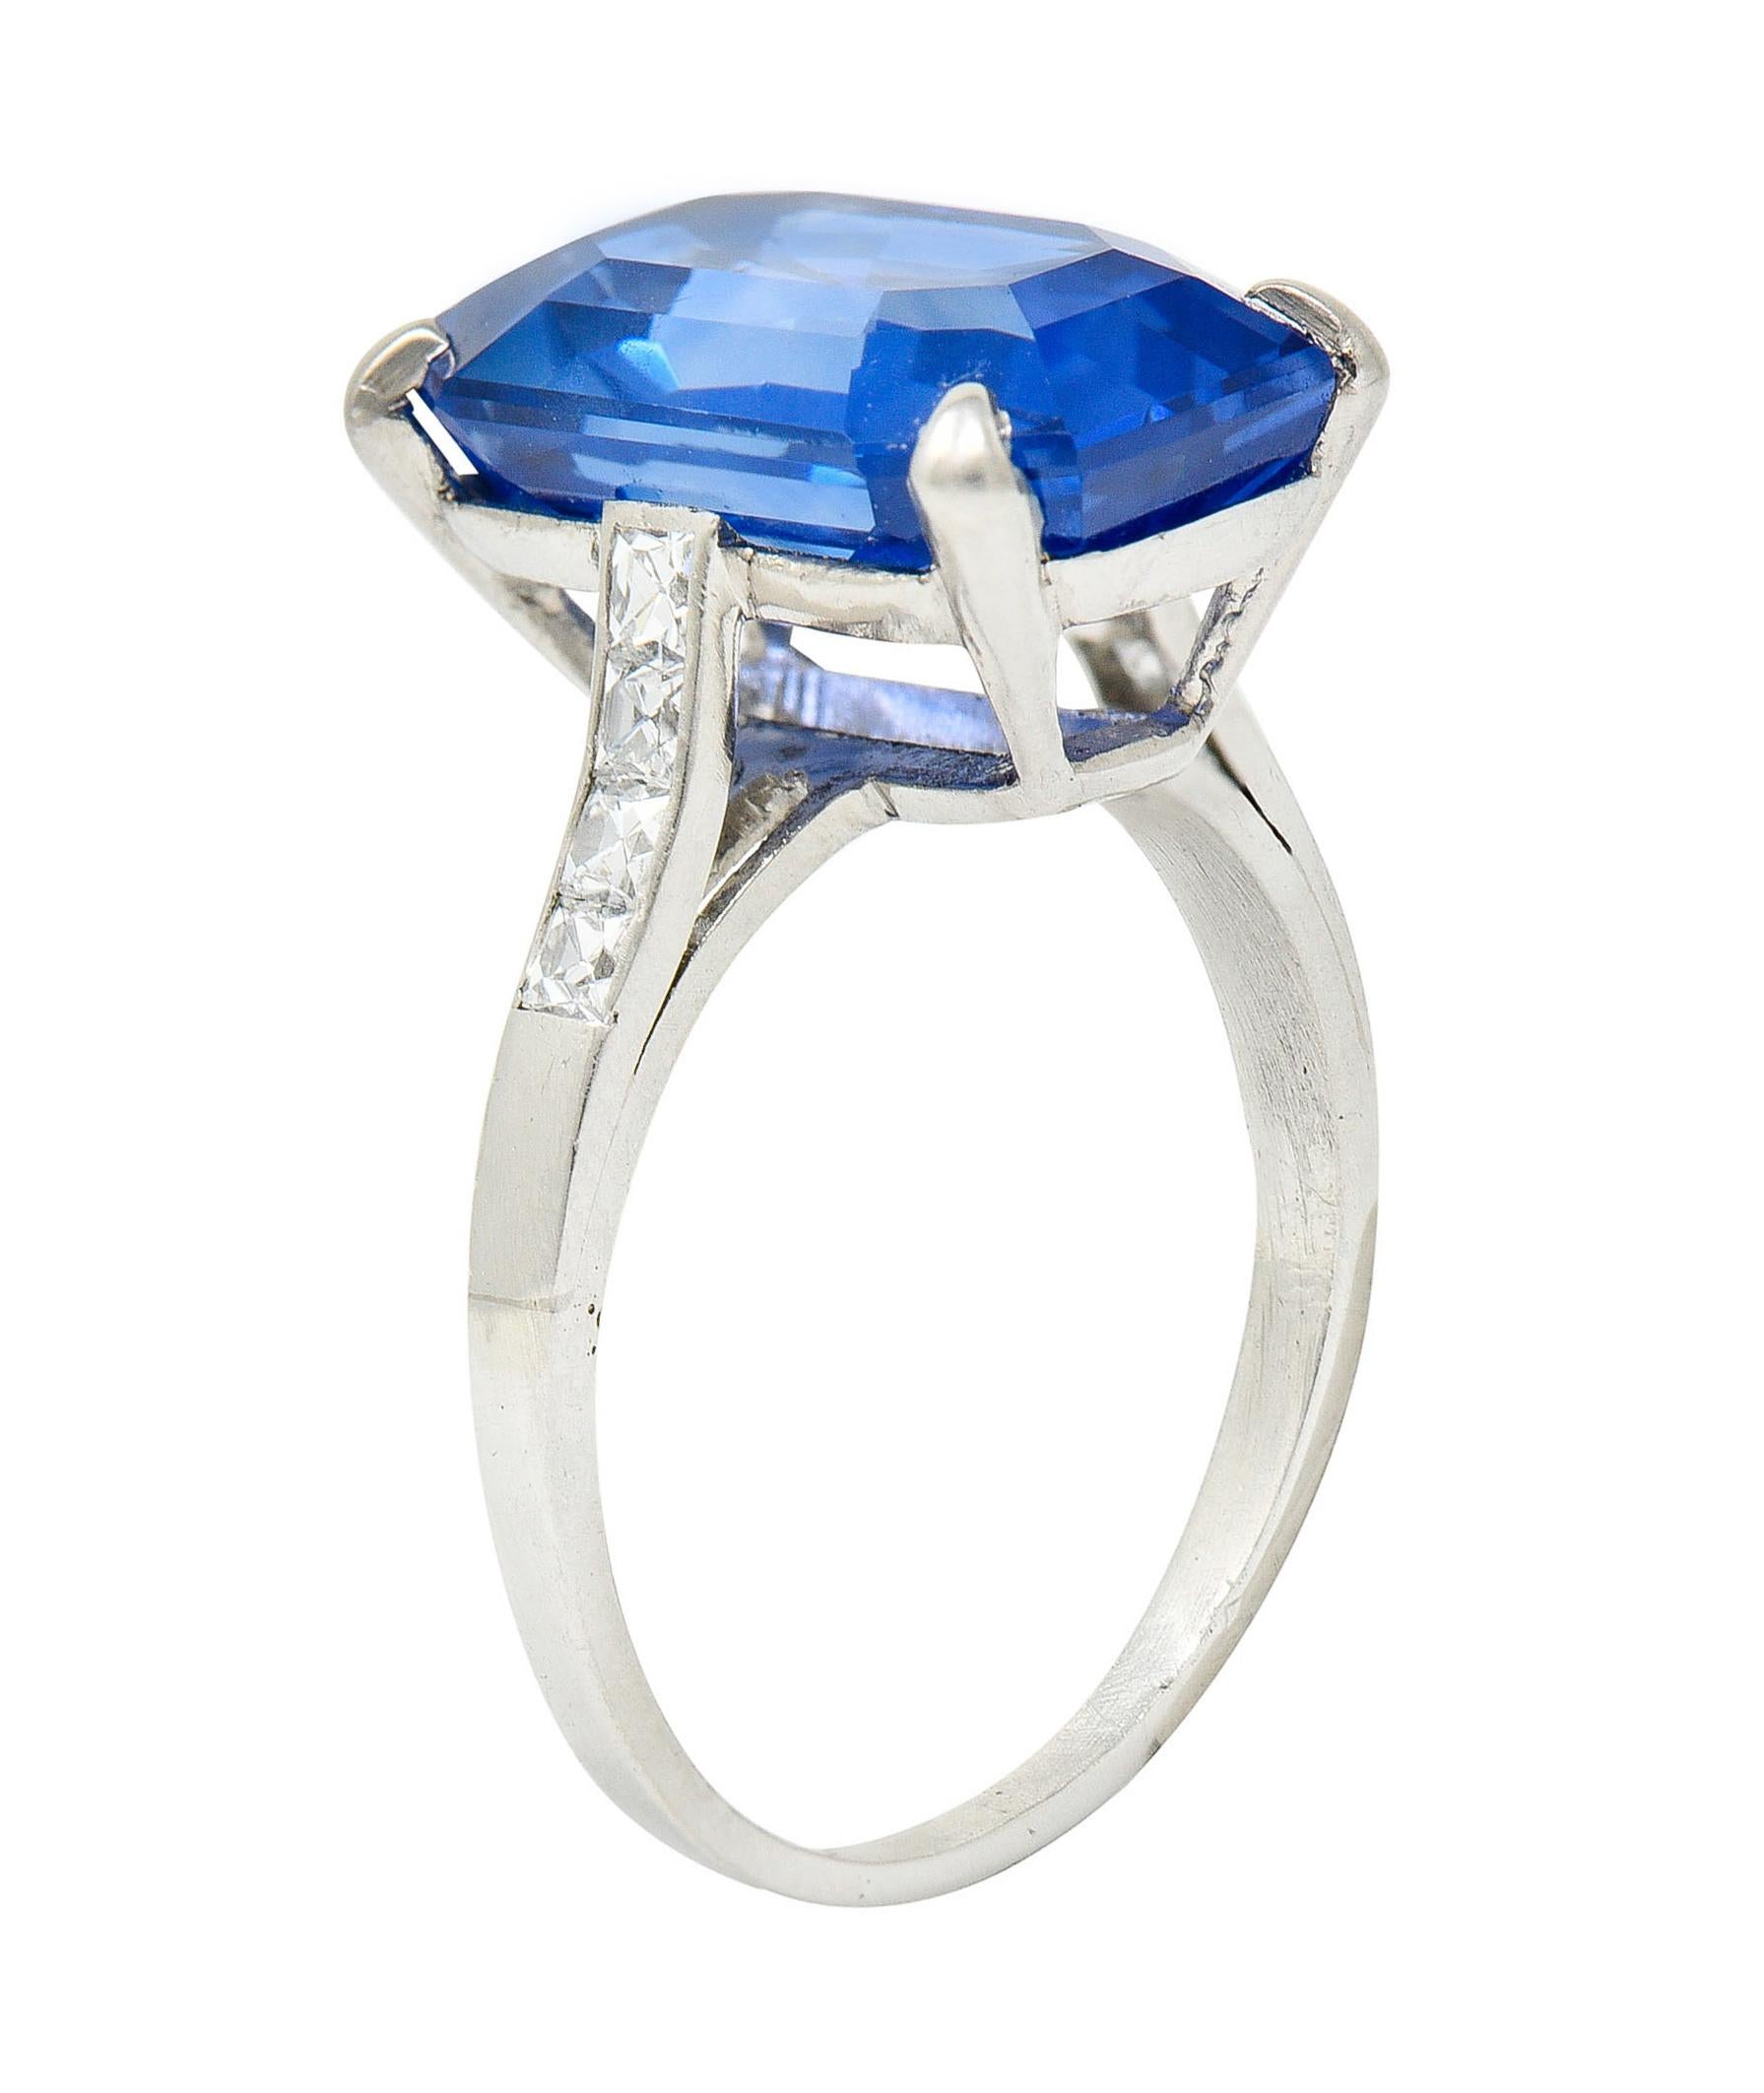 Centering an emerald cut Ceylon sapphire weighing 9.00 carats

Transparent with strong cornflower blue color and no indications of heat - Sri Lankan in origin

Basket set and flanked by cathedral style shoulders accented by French cut